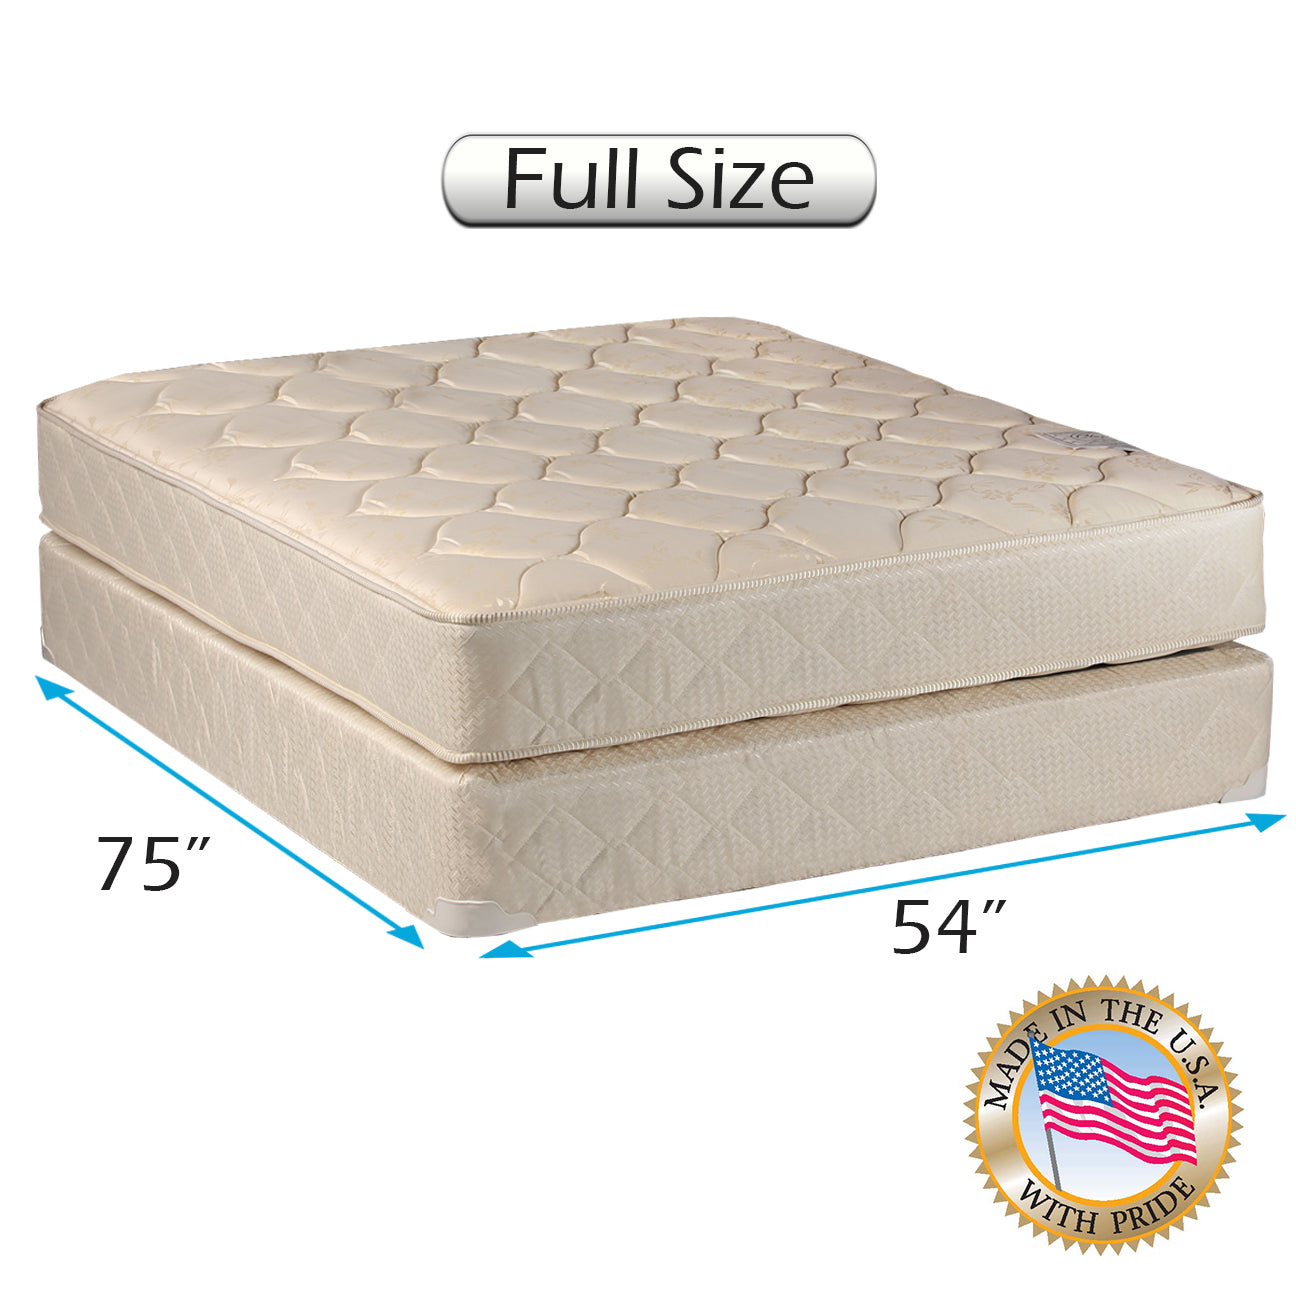 Comfort Classic Gentle Firm Full Size Mattress and Box Spring Set - Fully Assembled, Orthopedic, Good for Your Back, Long Lasting and 2 Sided